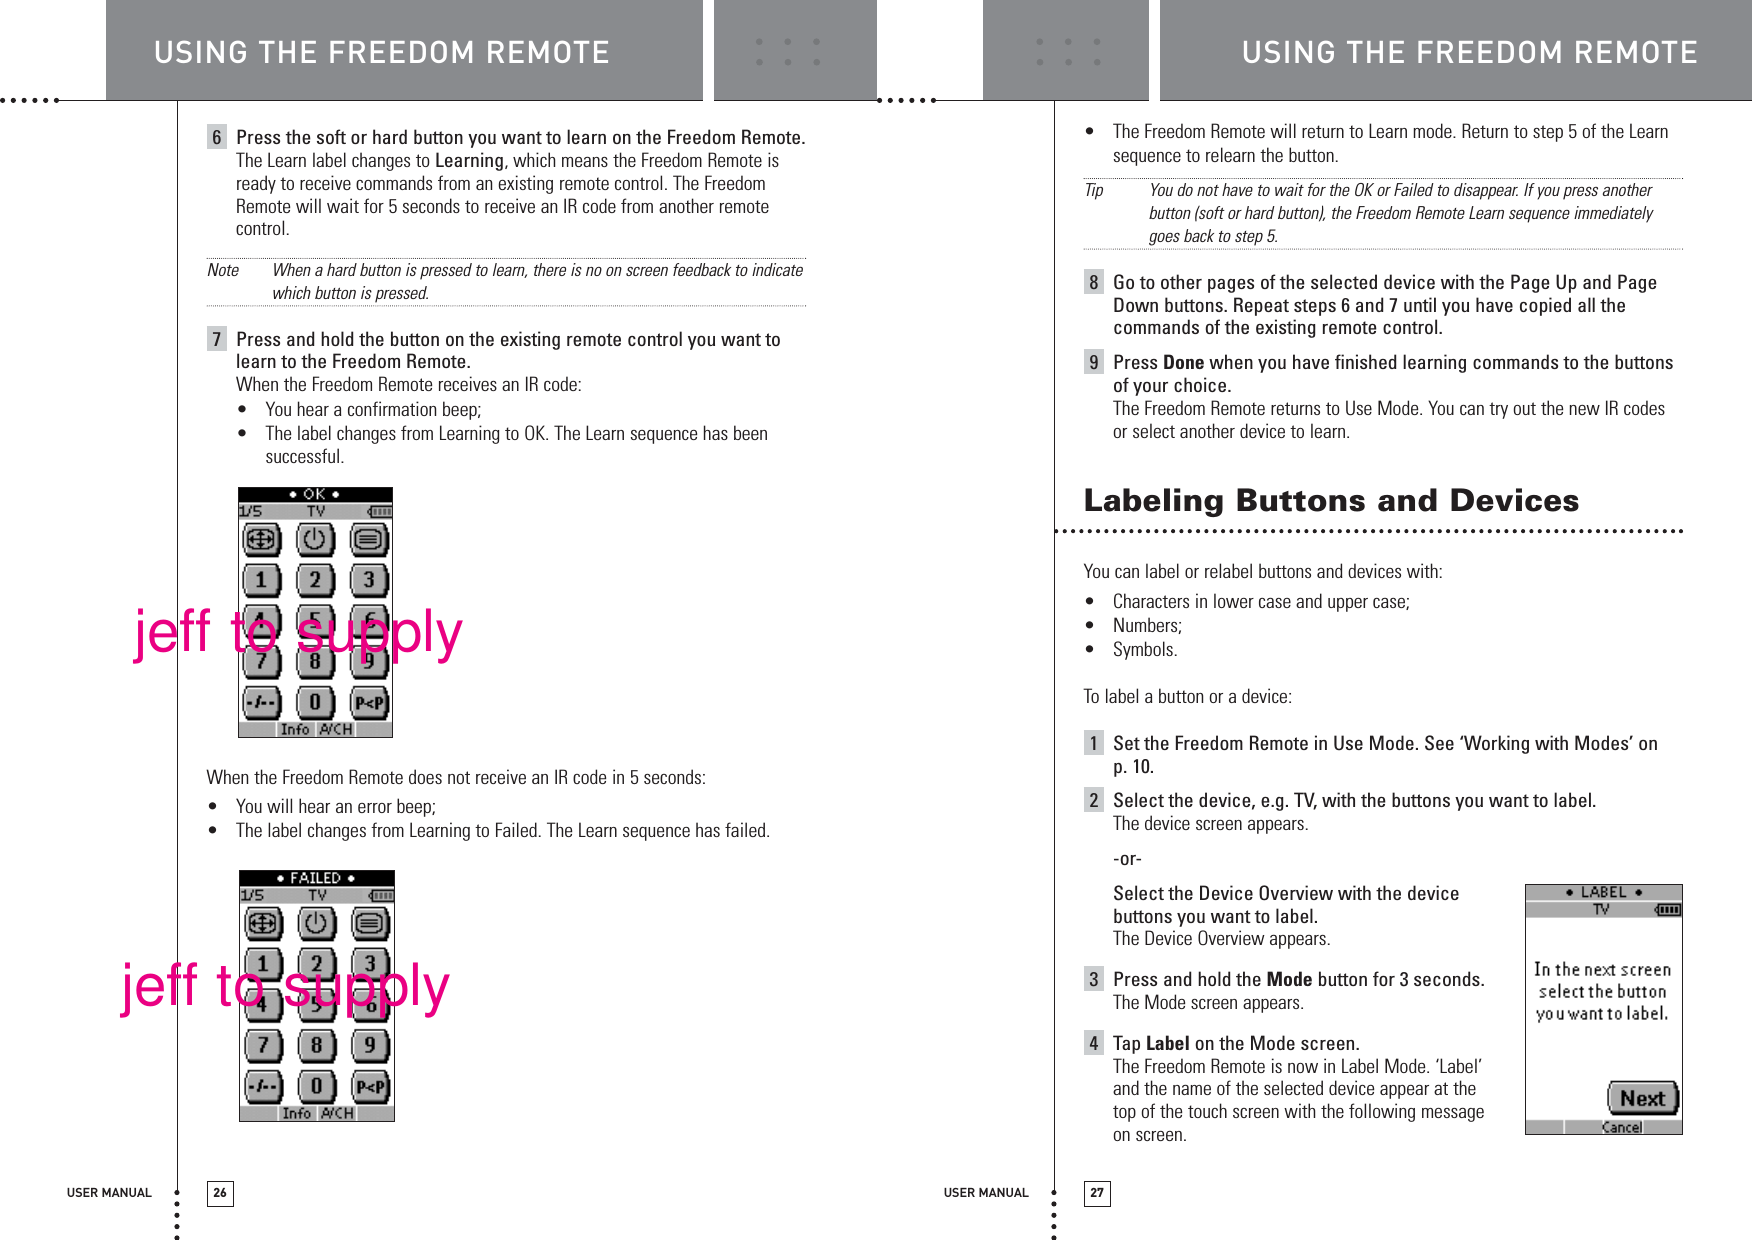 USER MANUAL 26 USER MANUAL 276Press the soft or hard button you want to learn on the Freedom Remote.The Learn label changes to Learning, which means the Freedom Remote isready to receive commands from an existing remote control. The FreedomRemote will wait for 5 seconds to receive an IR code from another remotecontrol.Note When a hard button is pressed to learn, there is no on screen feedback to indicatewhich button is pressed.7Press and hold the button on the existing remote control you want tolearn to the Freedom Remote.When the Freedom Remote receives an IR code:•You hear a confirmation beep;•The label changes from Learning to OK. The Learn sequence has beensuccessful. When the Freedom Remote does not receive an IR code in 5 seconds:•You will hear an error beep;•The label changes from Learning to Failed. The Learn sequence has failed.•The Freedom Remote will return to Learn mode. Return to step 5 of the Learnsequence to relearn the button.TipYou do not have to wait for the OK or Failed to disappear. If you press anotherbutton (soft or hard button), the Freedom Remote Learn sequence immediatelygoes back to step 5. 8Go to other pages of the selected device with the Page Up and PageDown buttons. Repeat steps 6 and 7 until you have copied all thecommands of the existing remote control.9Press Done when you have finished learning commands to the buttonsof your choice.The Freedom Remote returns to Use Mode. You can try out the new IR codesor select another device to learn.Labeling Buttons and DevicesYou can label or relabel buttons and devices with:•Characters in lower case and upper case;•Numbers;•Symbols.To label a button or a device:1Set the Freedom Remote in Use Mode. See ‘Working with Modes’ on p. 10.2Select the device, e.g. TV, with the buttons you want to label.The device screen appears.-or-Select the Device Overview with the devicebuttons you want to label.The Device Overview appears.3Press and hold the Mode button for 3 seconds.The Mode screen appears.4Tap Label on the Mode screen.The Freedom Remote is now in Label Mode. ‘Label’and the name of the selected device appear at thetop of the touch screen with the following messageon screen.USING THE FREEDOM REMOTE USING THE FREEDOM REMOTEjeff to supplyjeff to supply